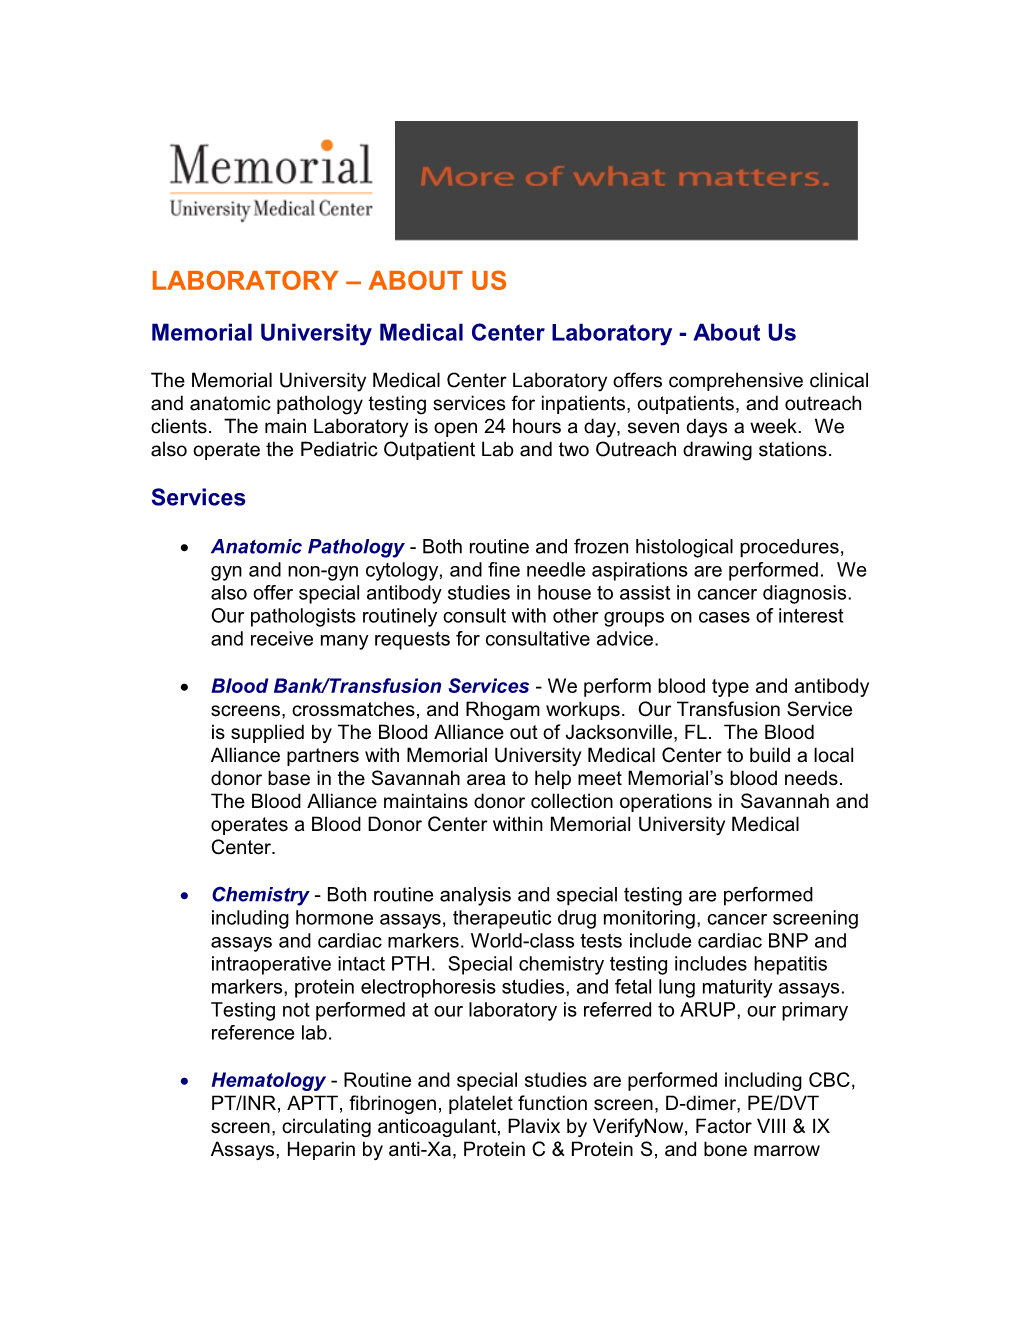 Memorial University Medical Center Laboratory - About Us